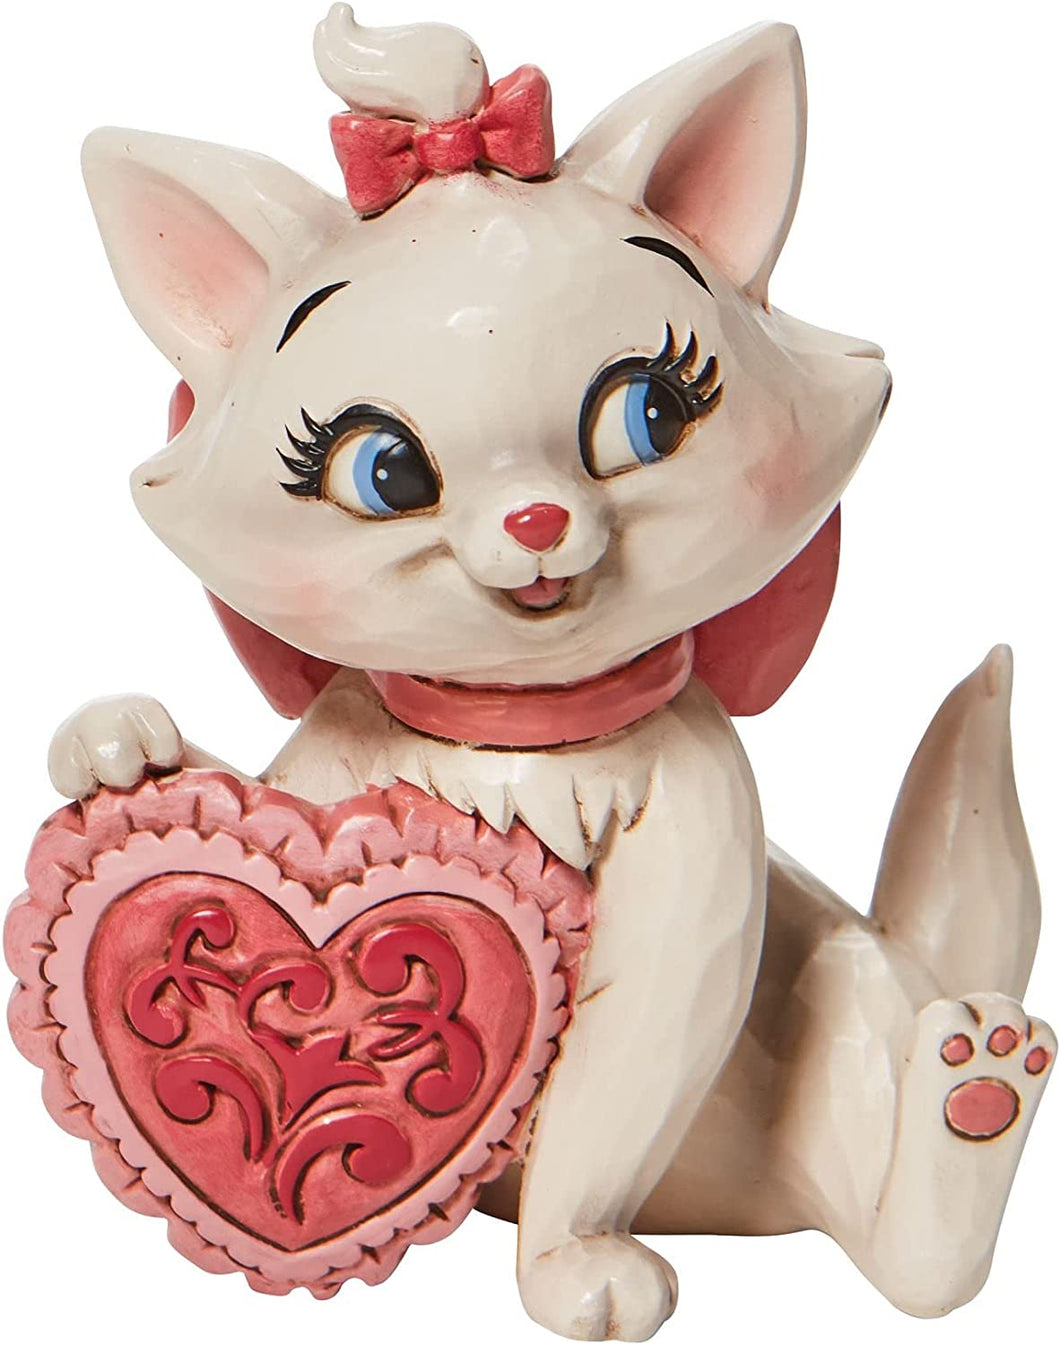 Disney Traditions Marie Holding Heart Figurine, 3.5 Inch, Multicolor